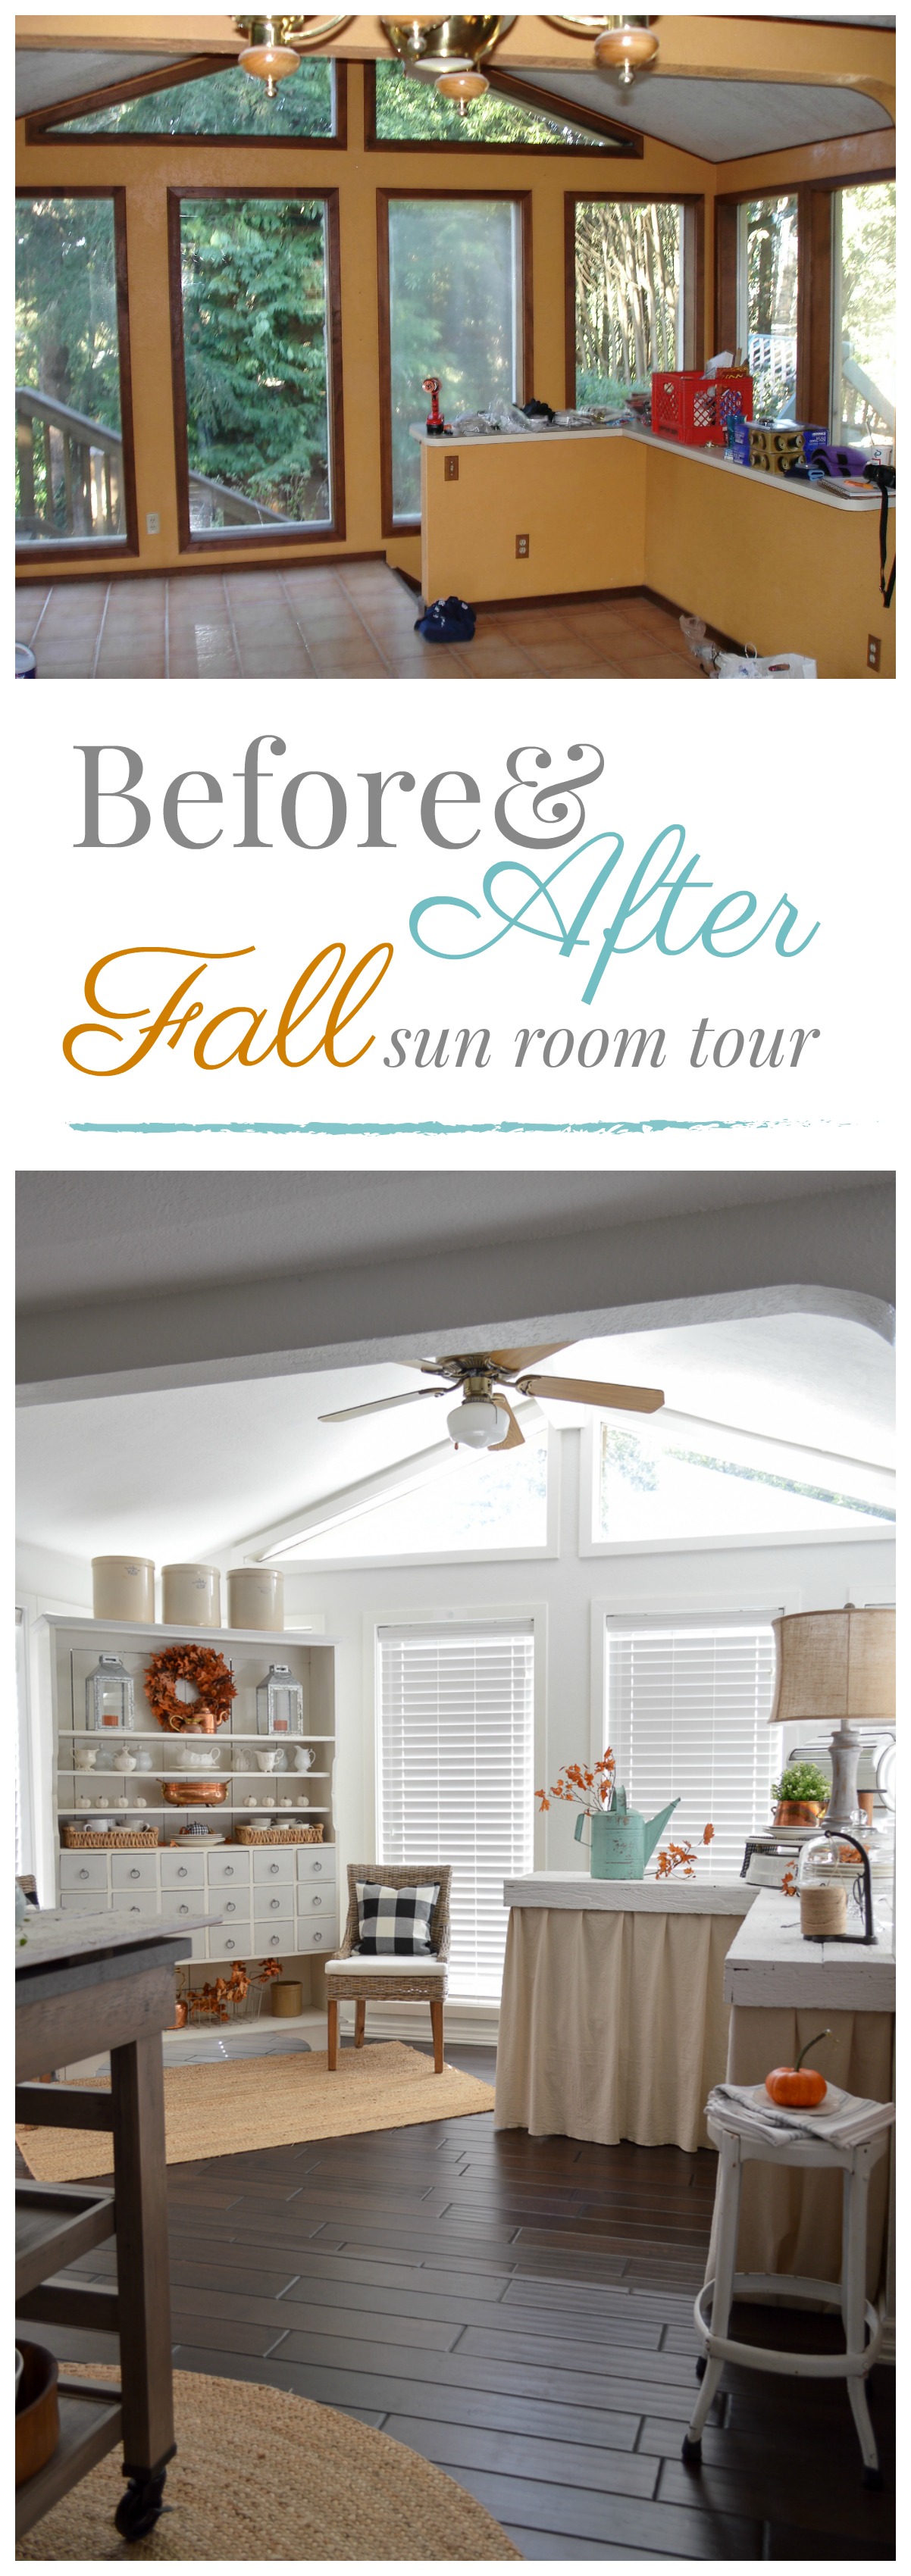 Before and after DIY sun room makeover, decorated for Fall - Fox Hollow Cottage